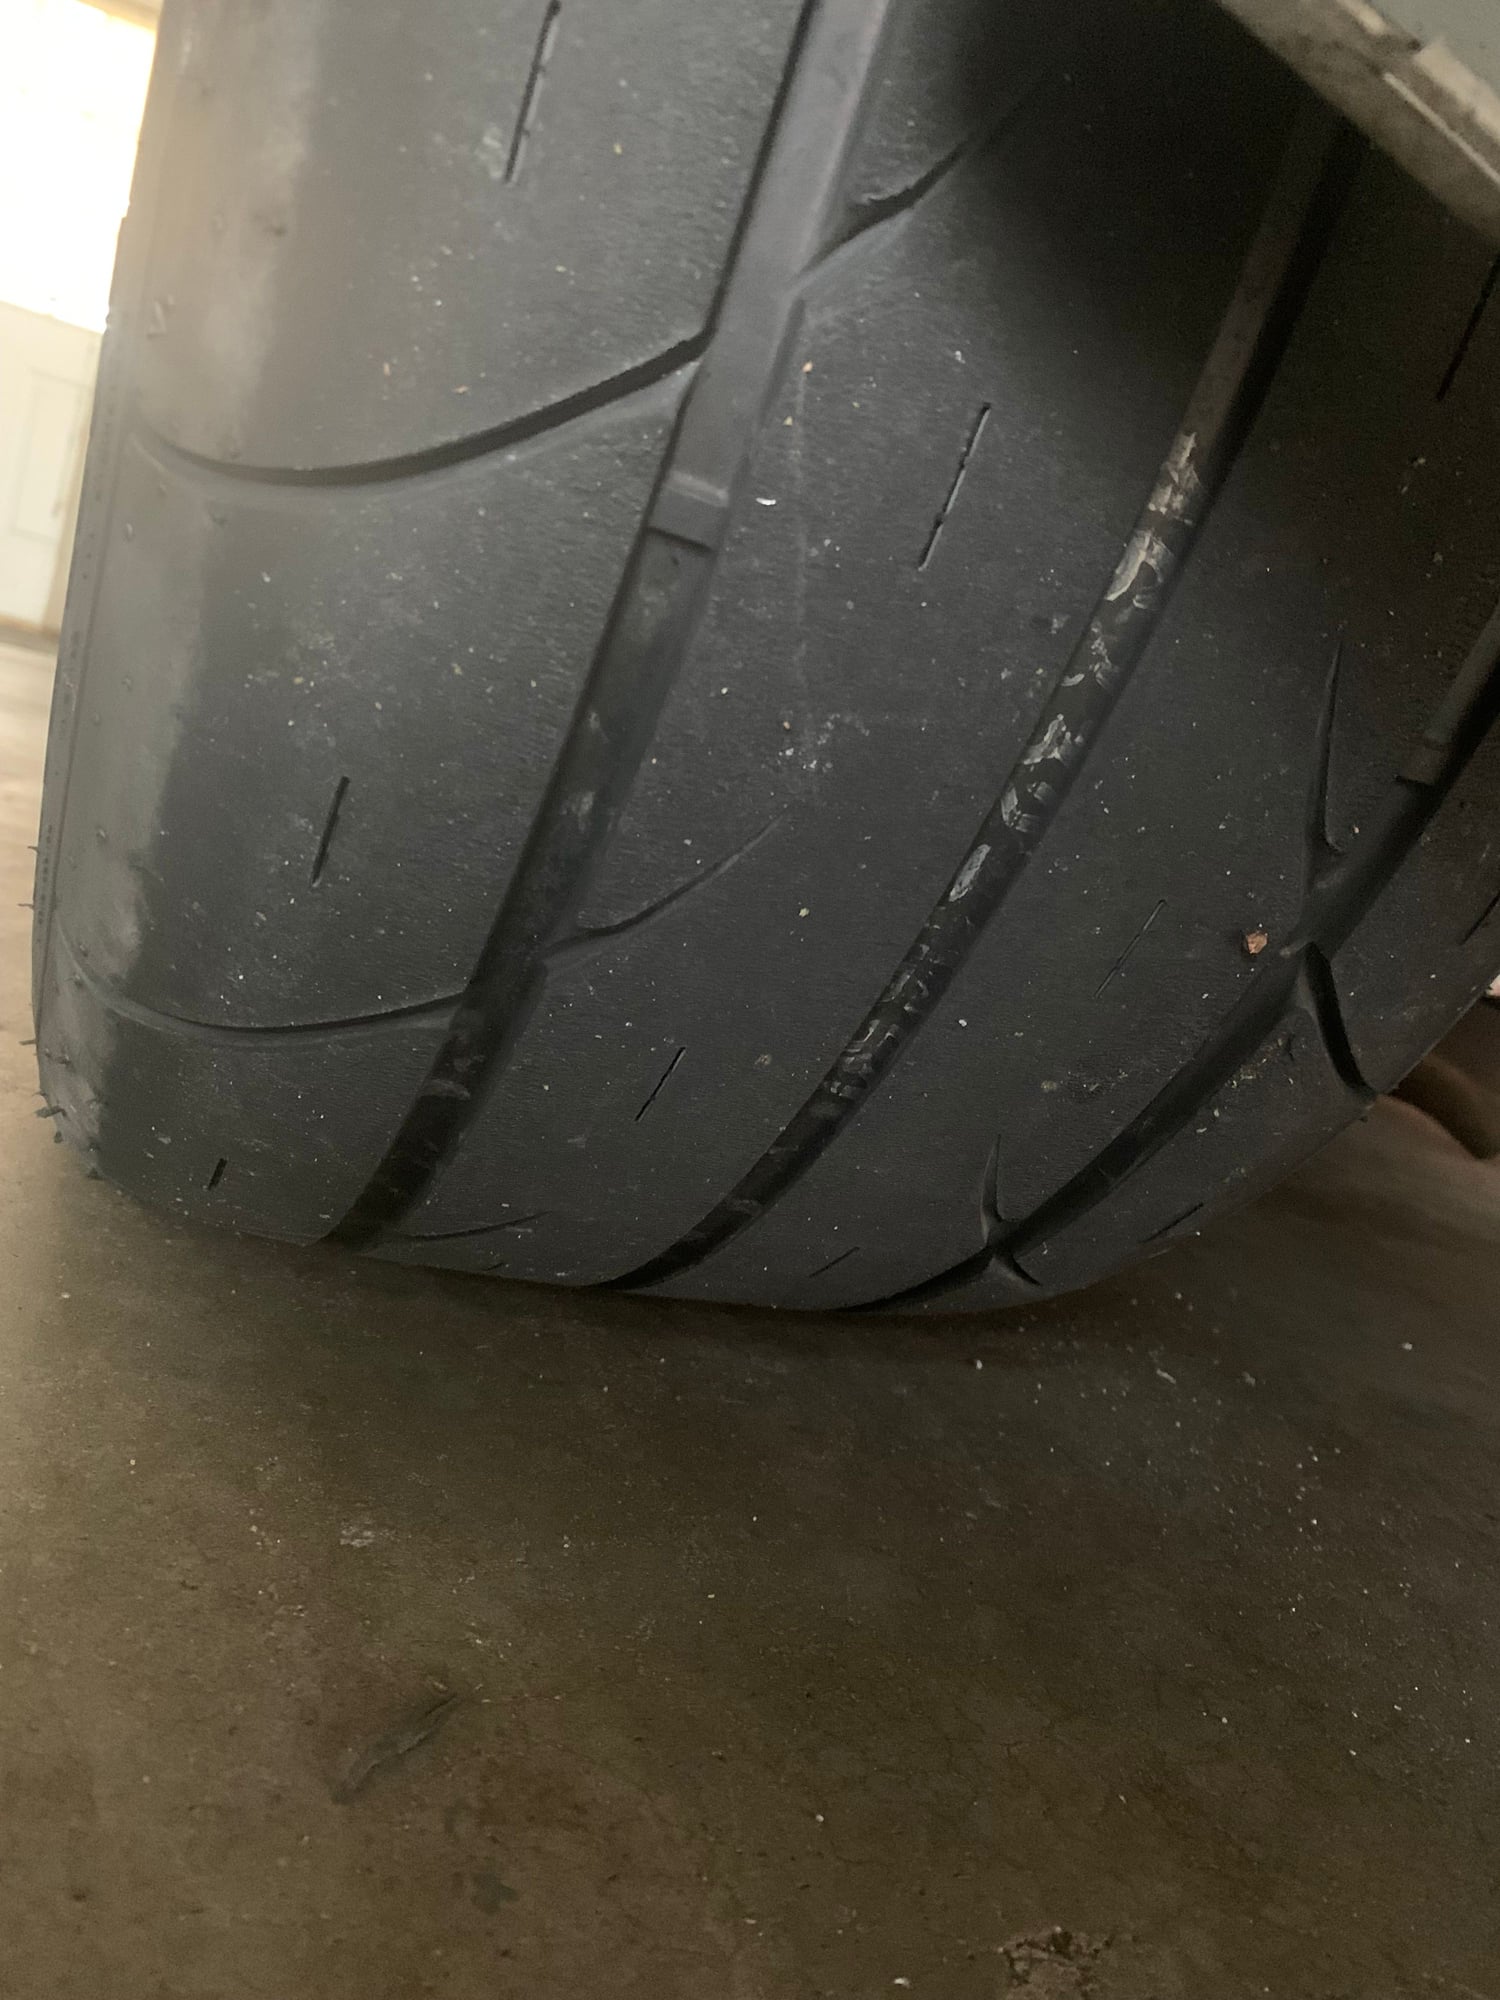 Wheels and Tires/Axles - Weld rts 15x10 - Used - 0  All Models - Lebanon, OH 45036, United States